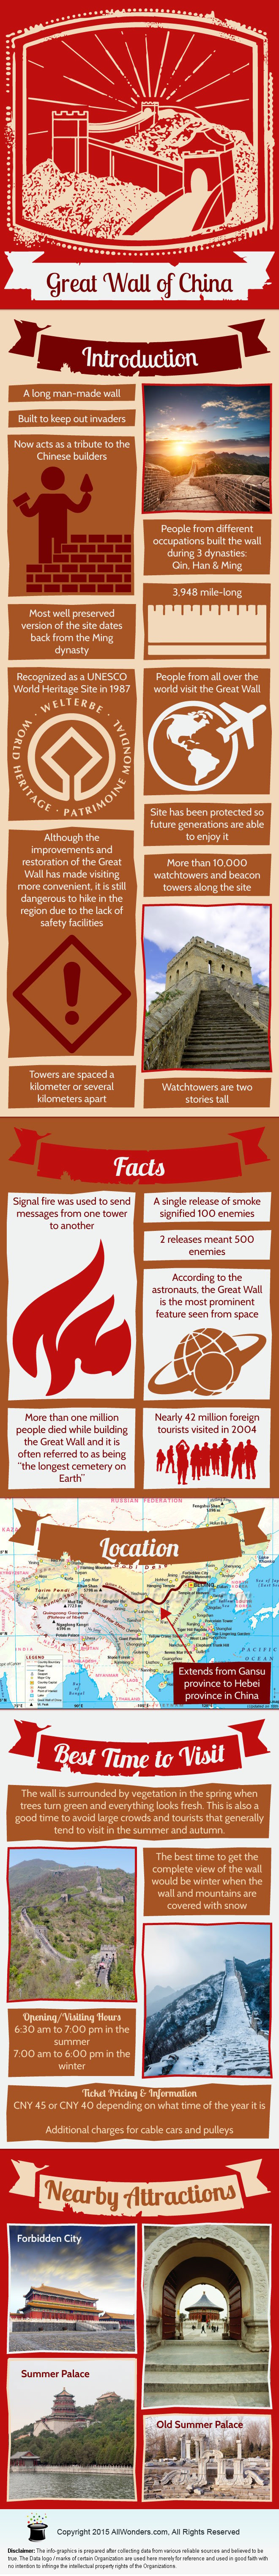 What is Great Wall of China - All about Great Wall of China [Infographic]